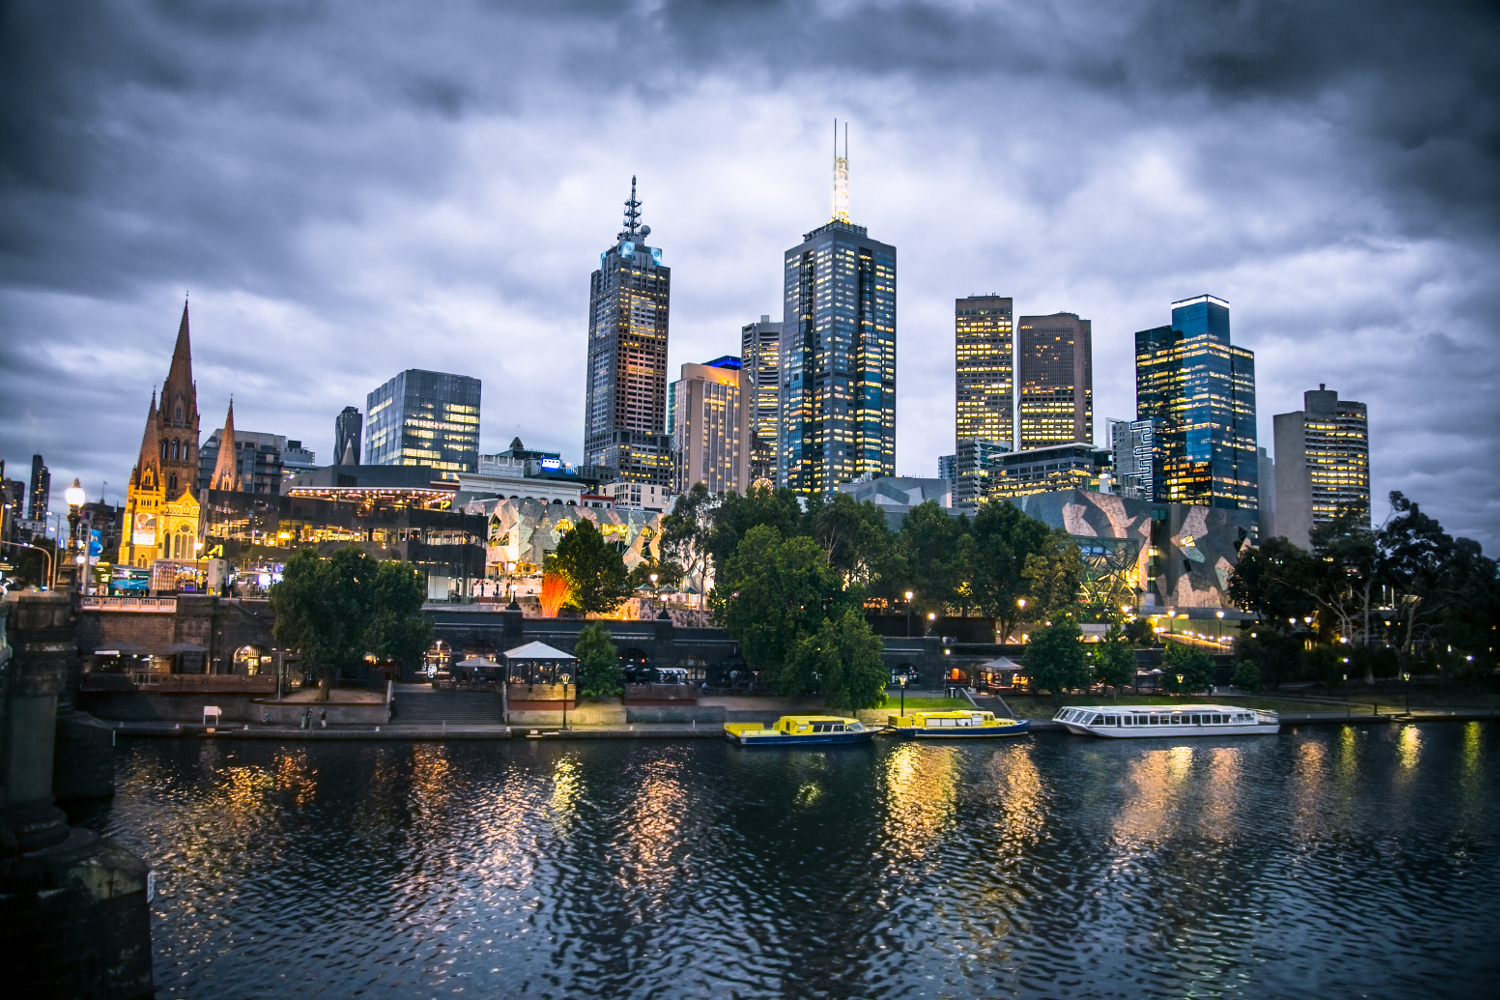 Melbourne city and the Yarra river at nighMelbourne city and the Yarra river at nigh